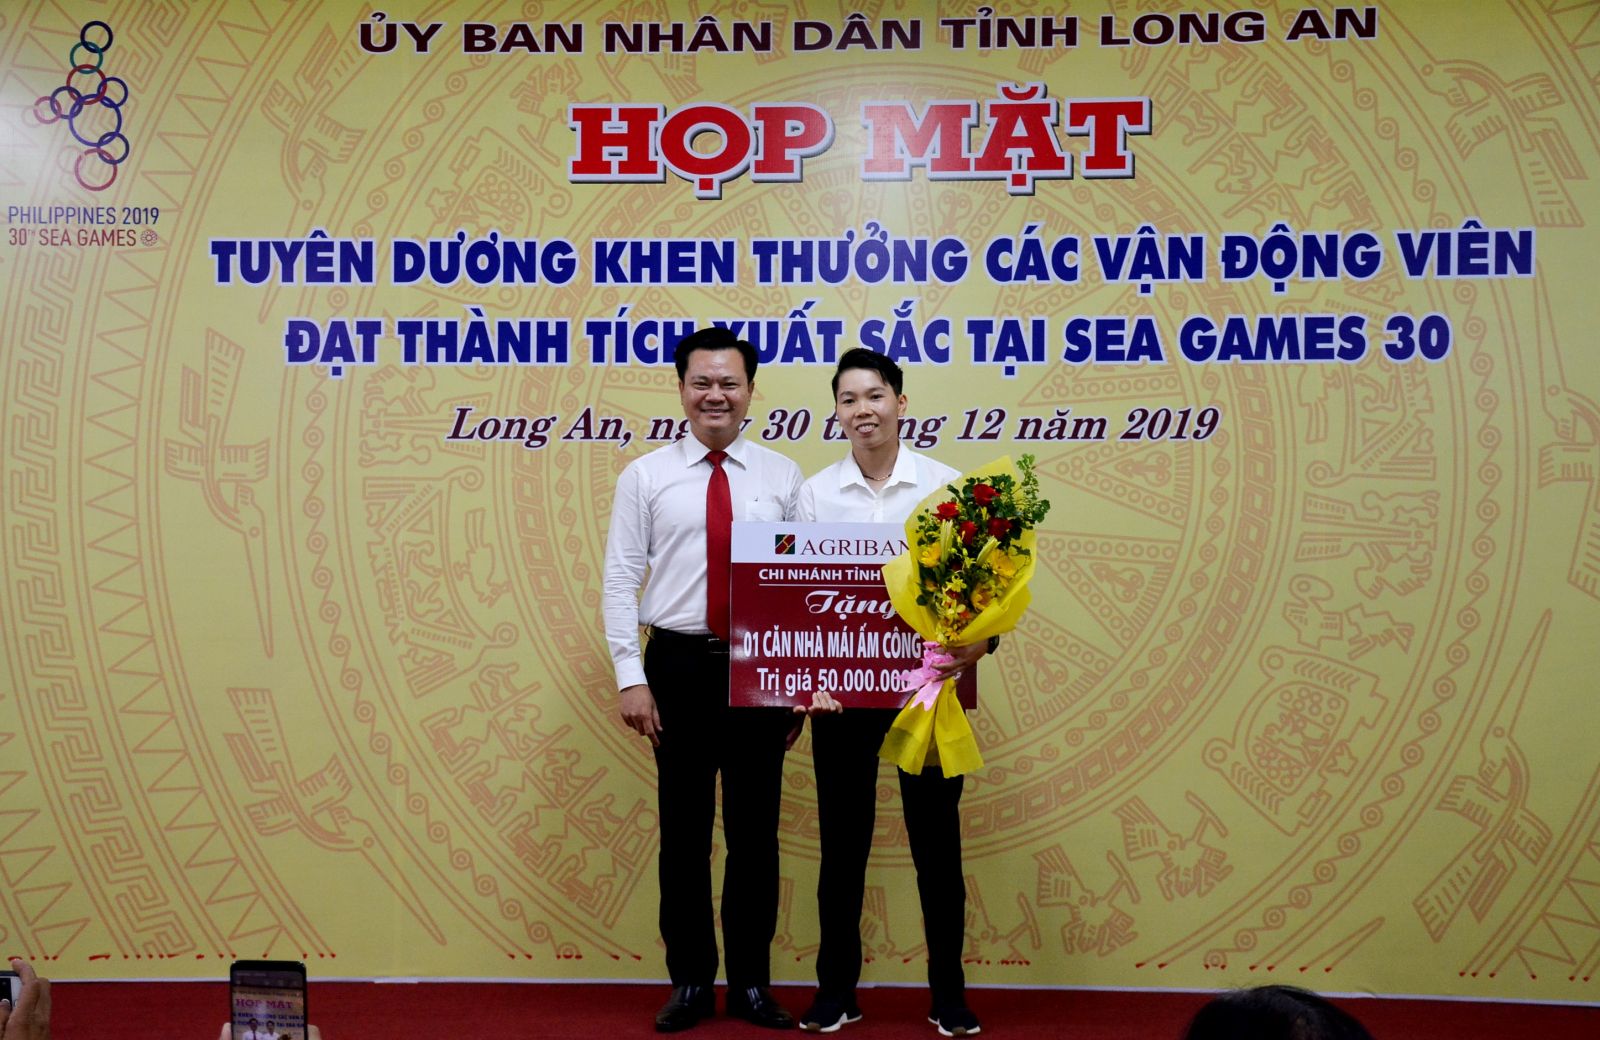 Long An Agribank branch donated a house of a union to Tran Thi Kim Thanh athlete to win gold medal with the women's football team